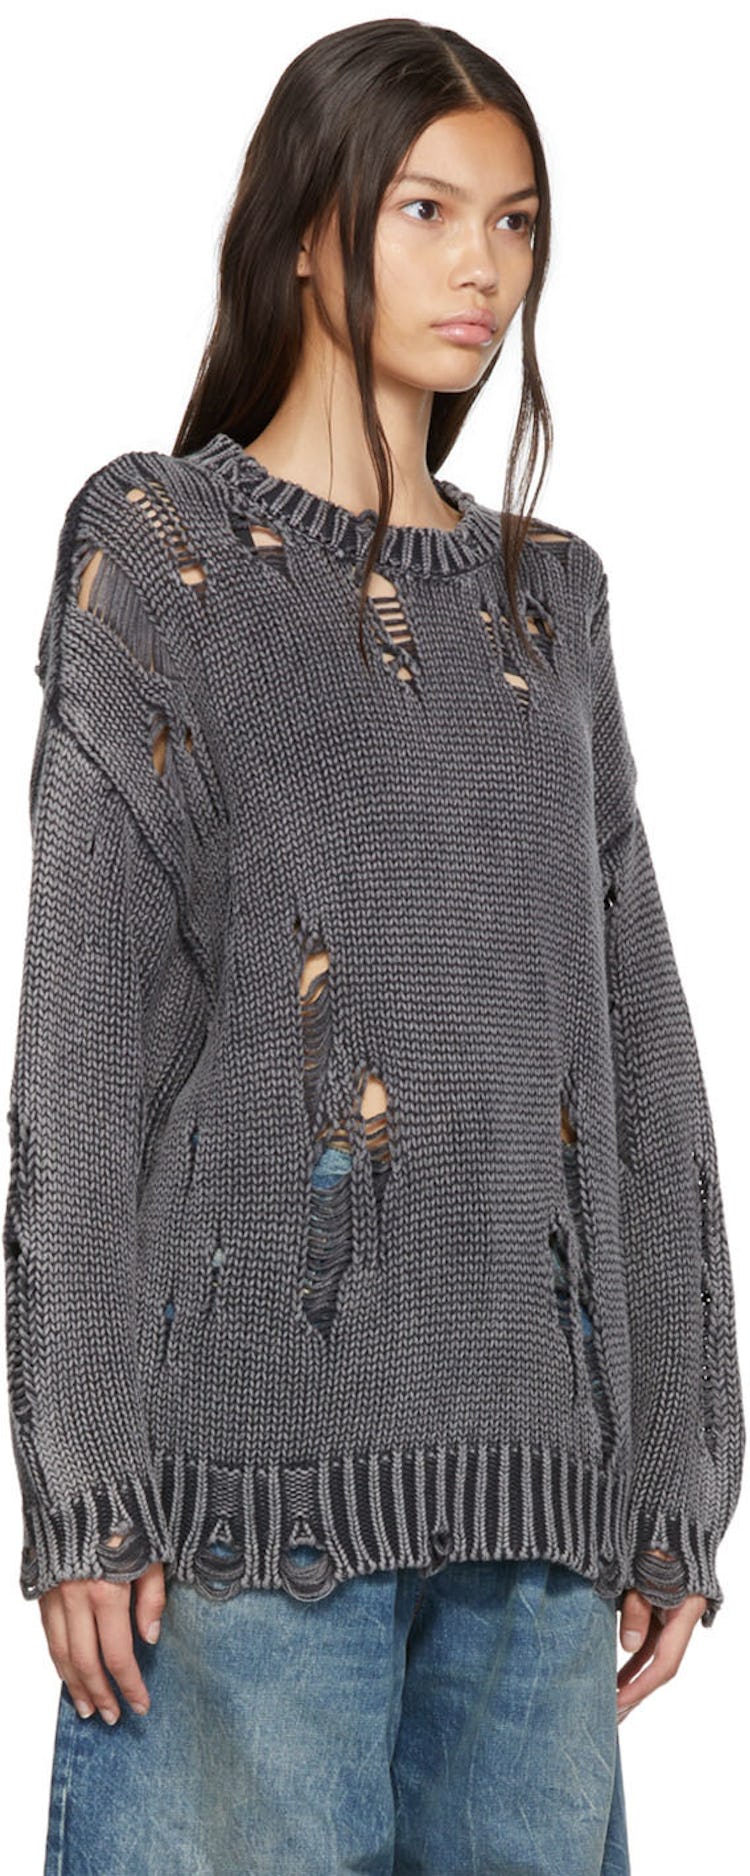 Black Distressed Sweater: additional image